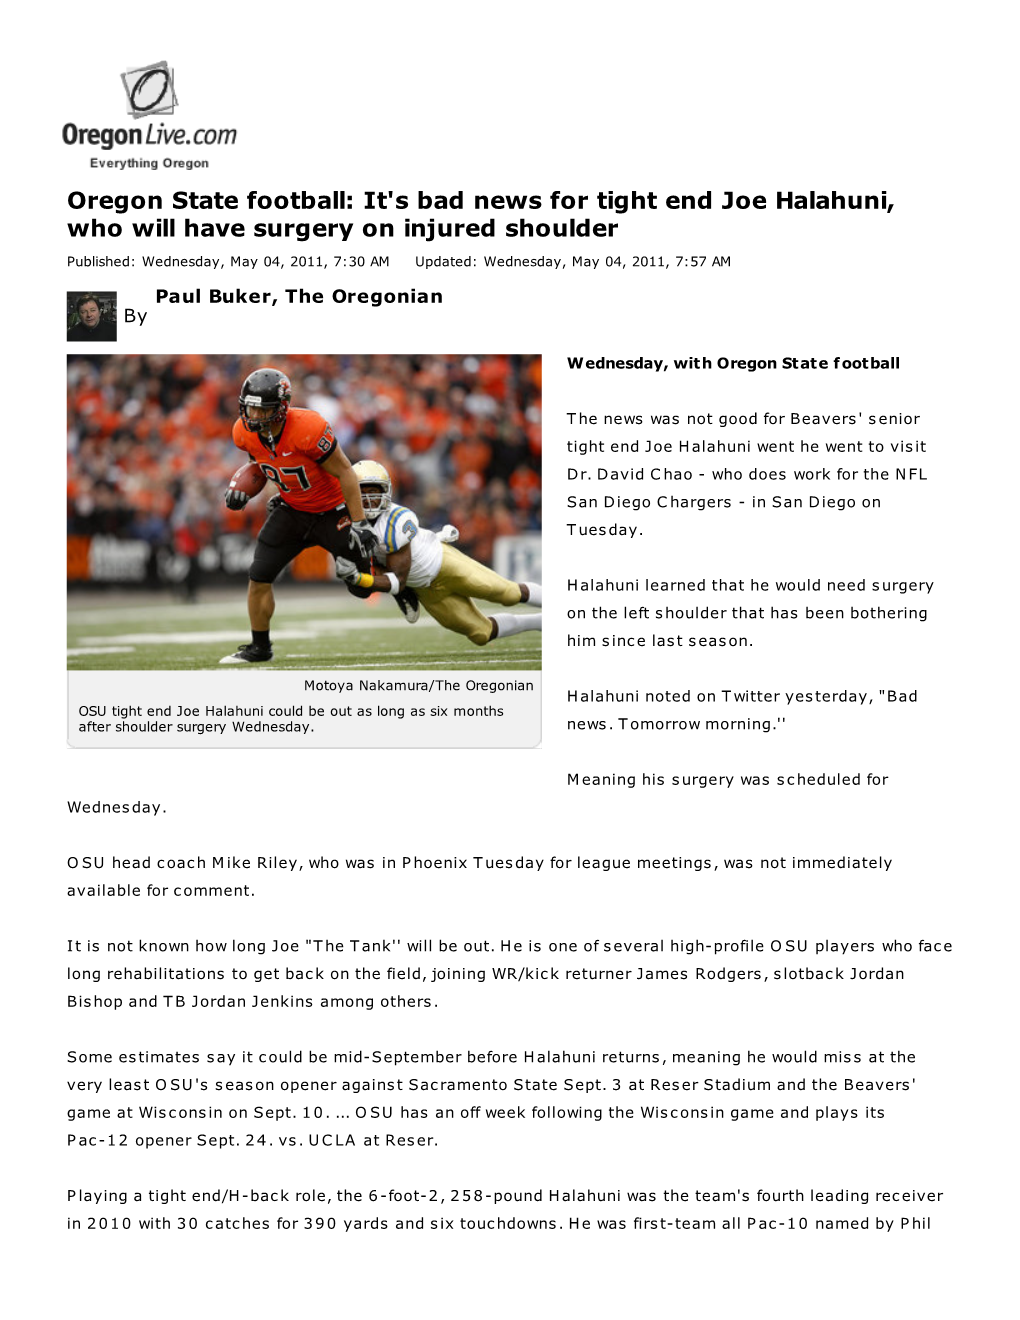 Oregon State Football: It's Bad News for Tight End Joe Halahuni, Who Will Have Surgery on Injured Shoulder